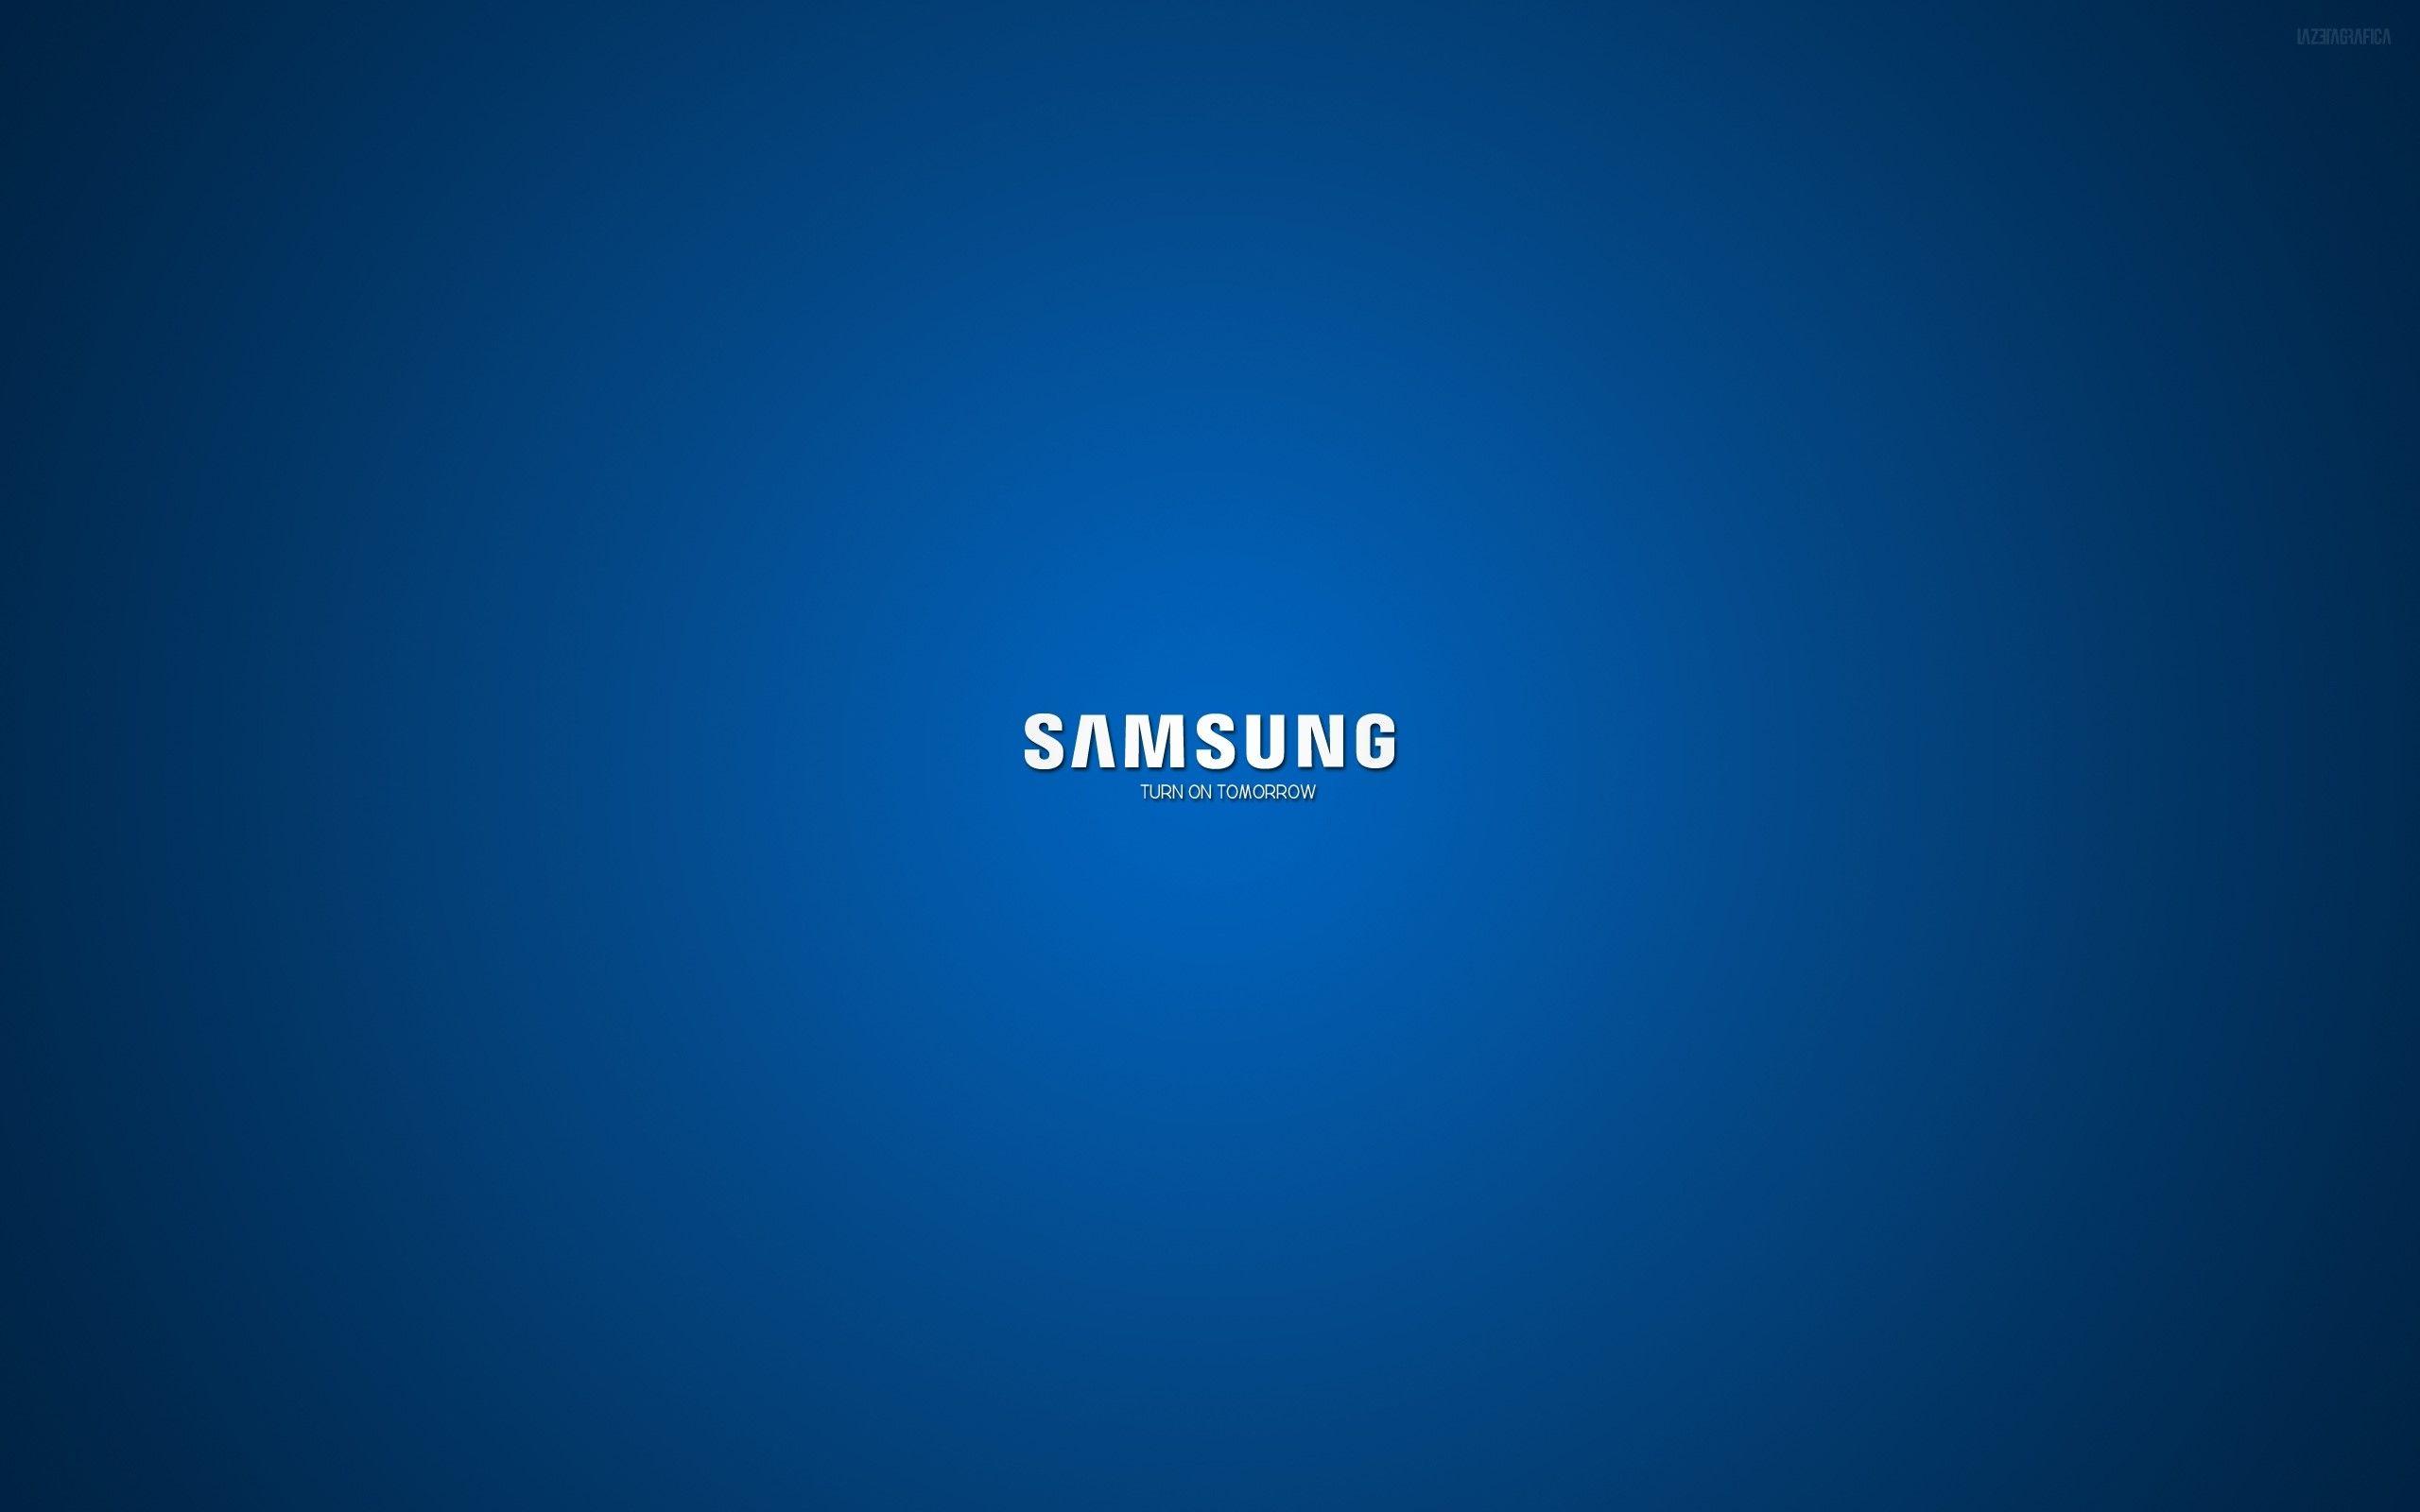 White and Blue Company Logo - Samsung, Company, Logo, Blue, White wallpaper and background